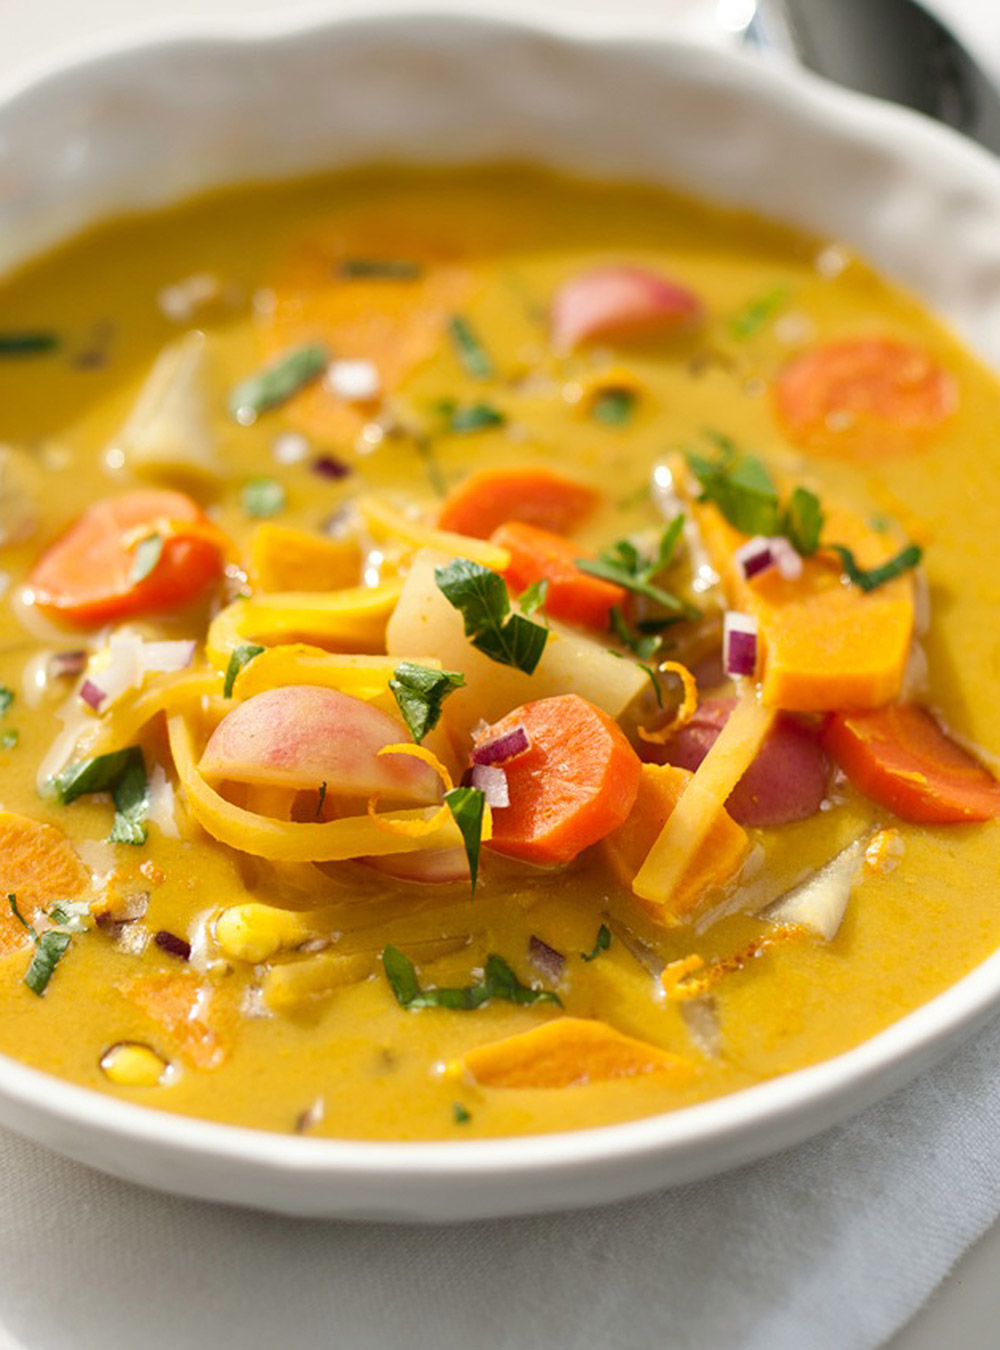 Joel Legendre’s Tapioca Soup with Fall Vegetables